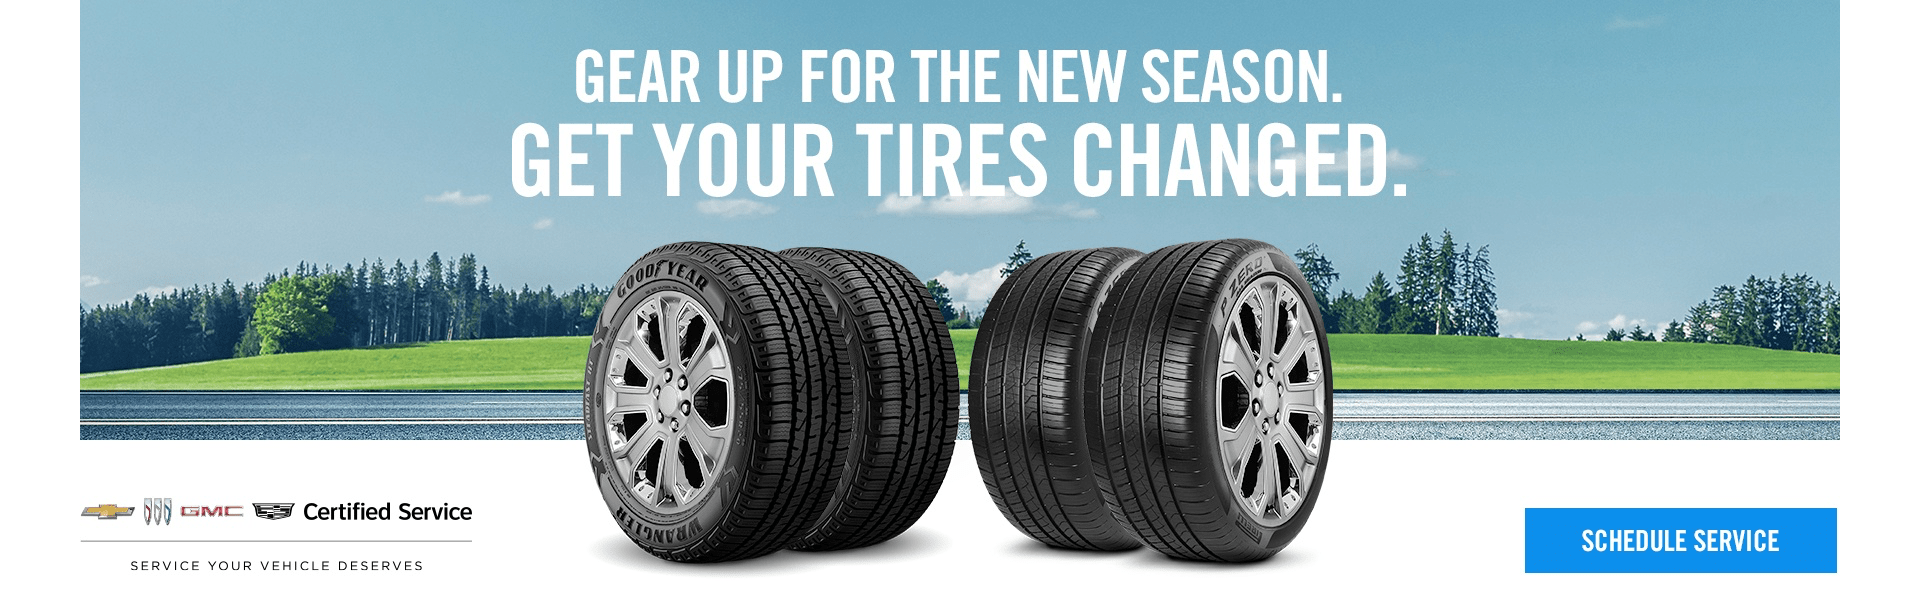 get-tires-changed-banner